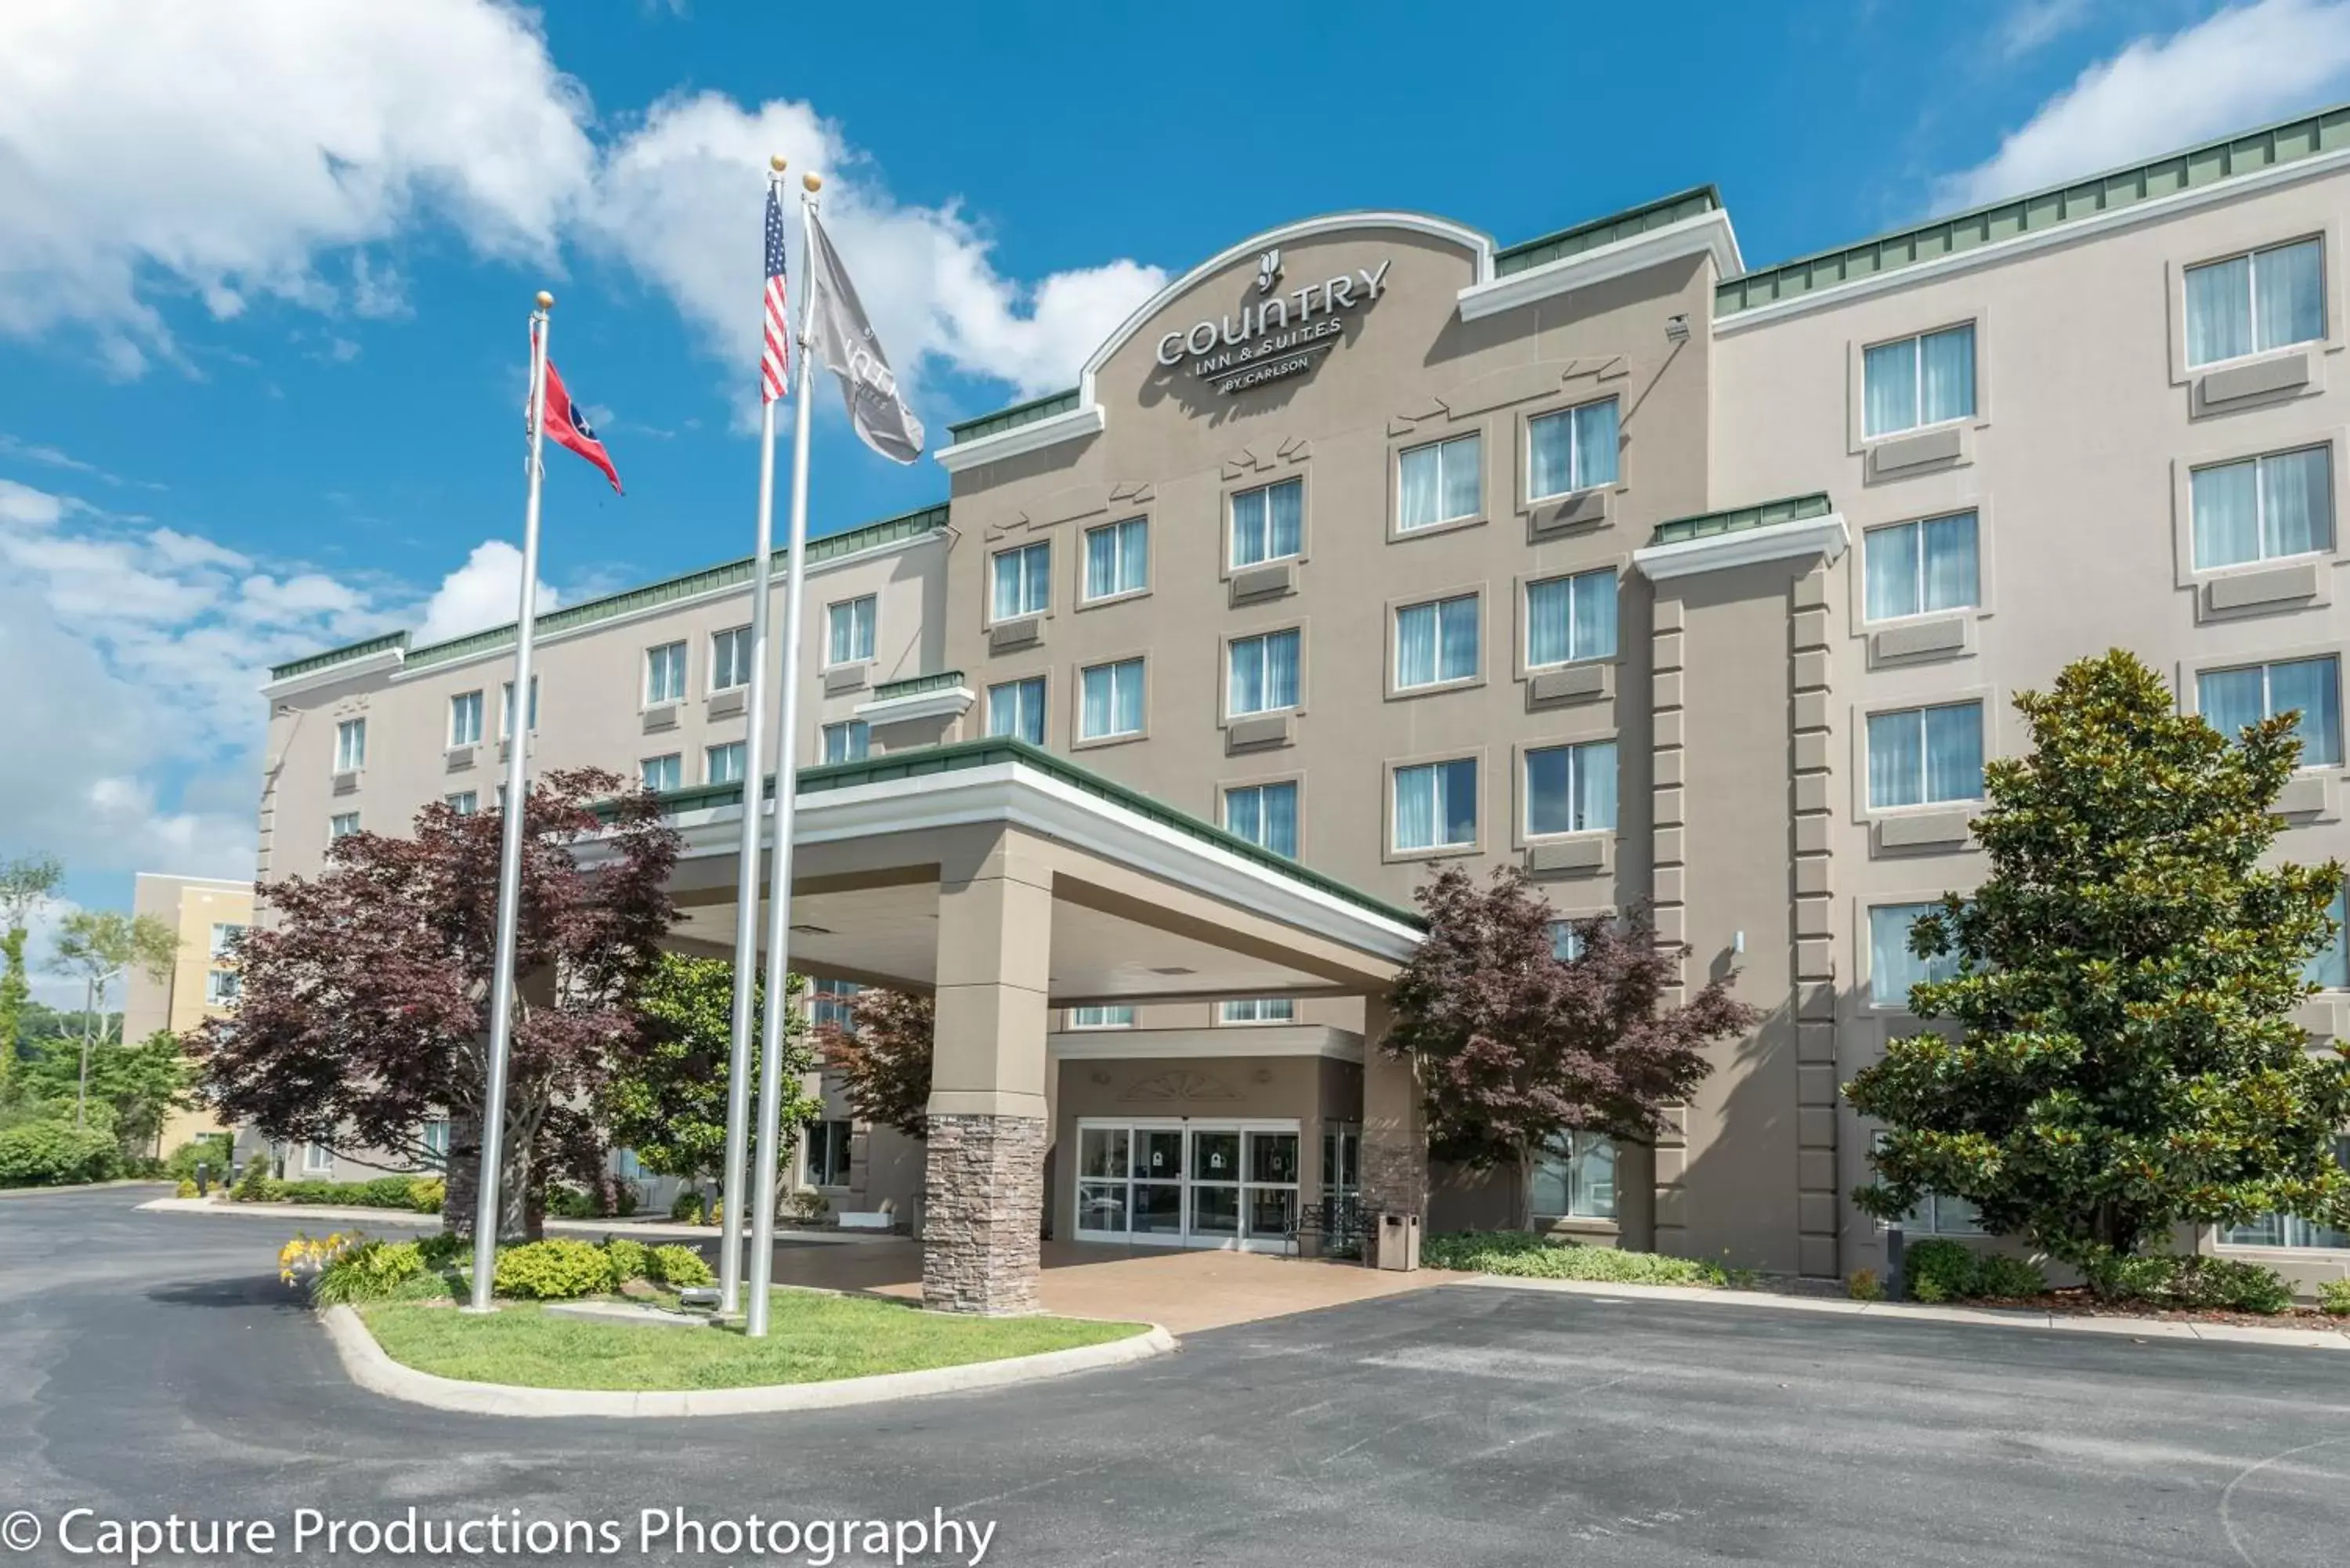 Facade/entrance, Property Building in Country Inn & Suites by Radisson, Cookeville, TN